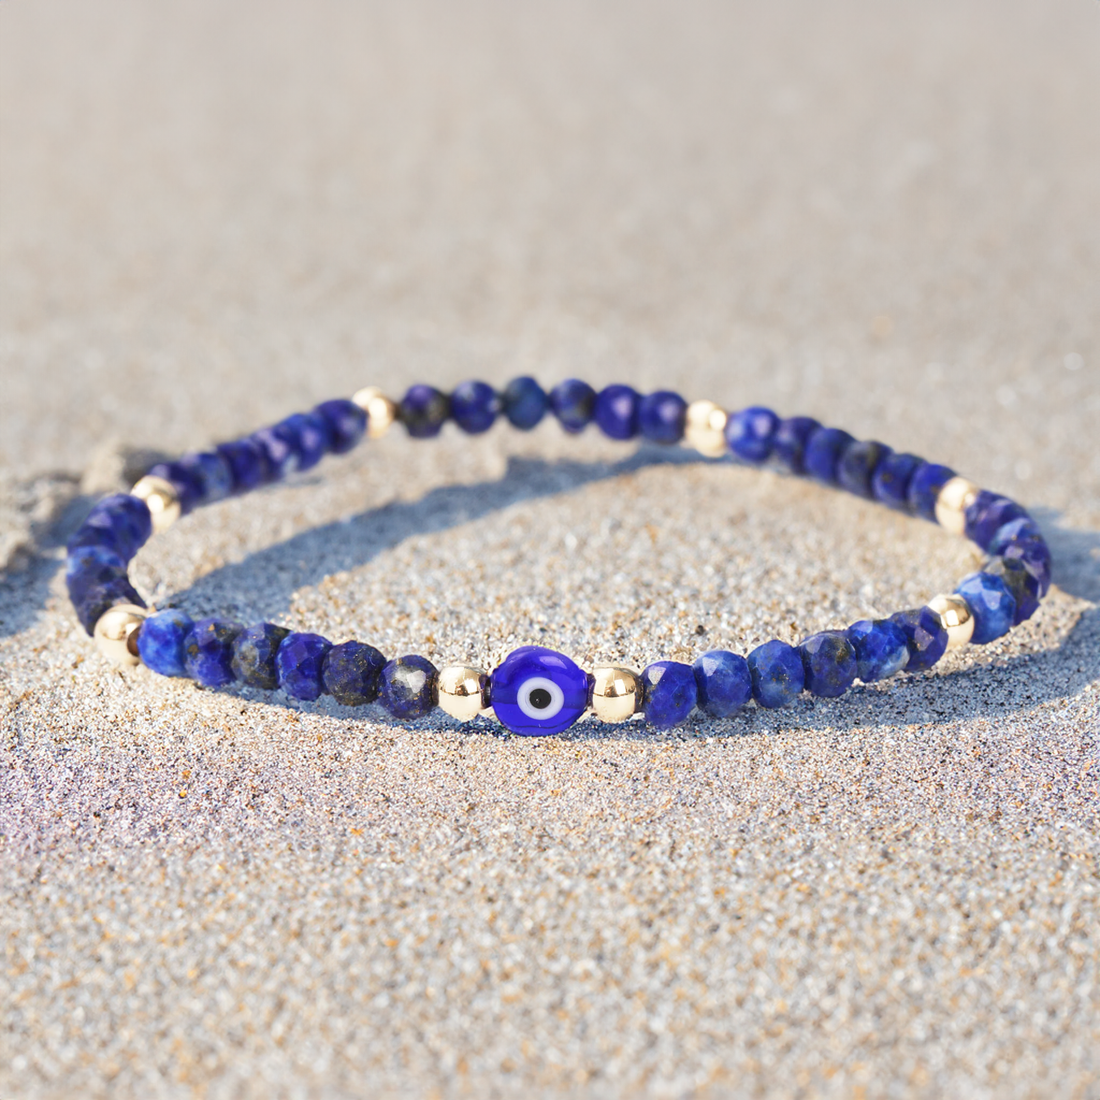 Evil Eye Bracelet Handmade Natural Stone Lapis Faceted Rondelle Beads Women's Jewlery Powerful Protection Safe